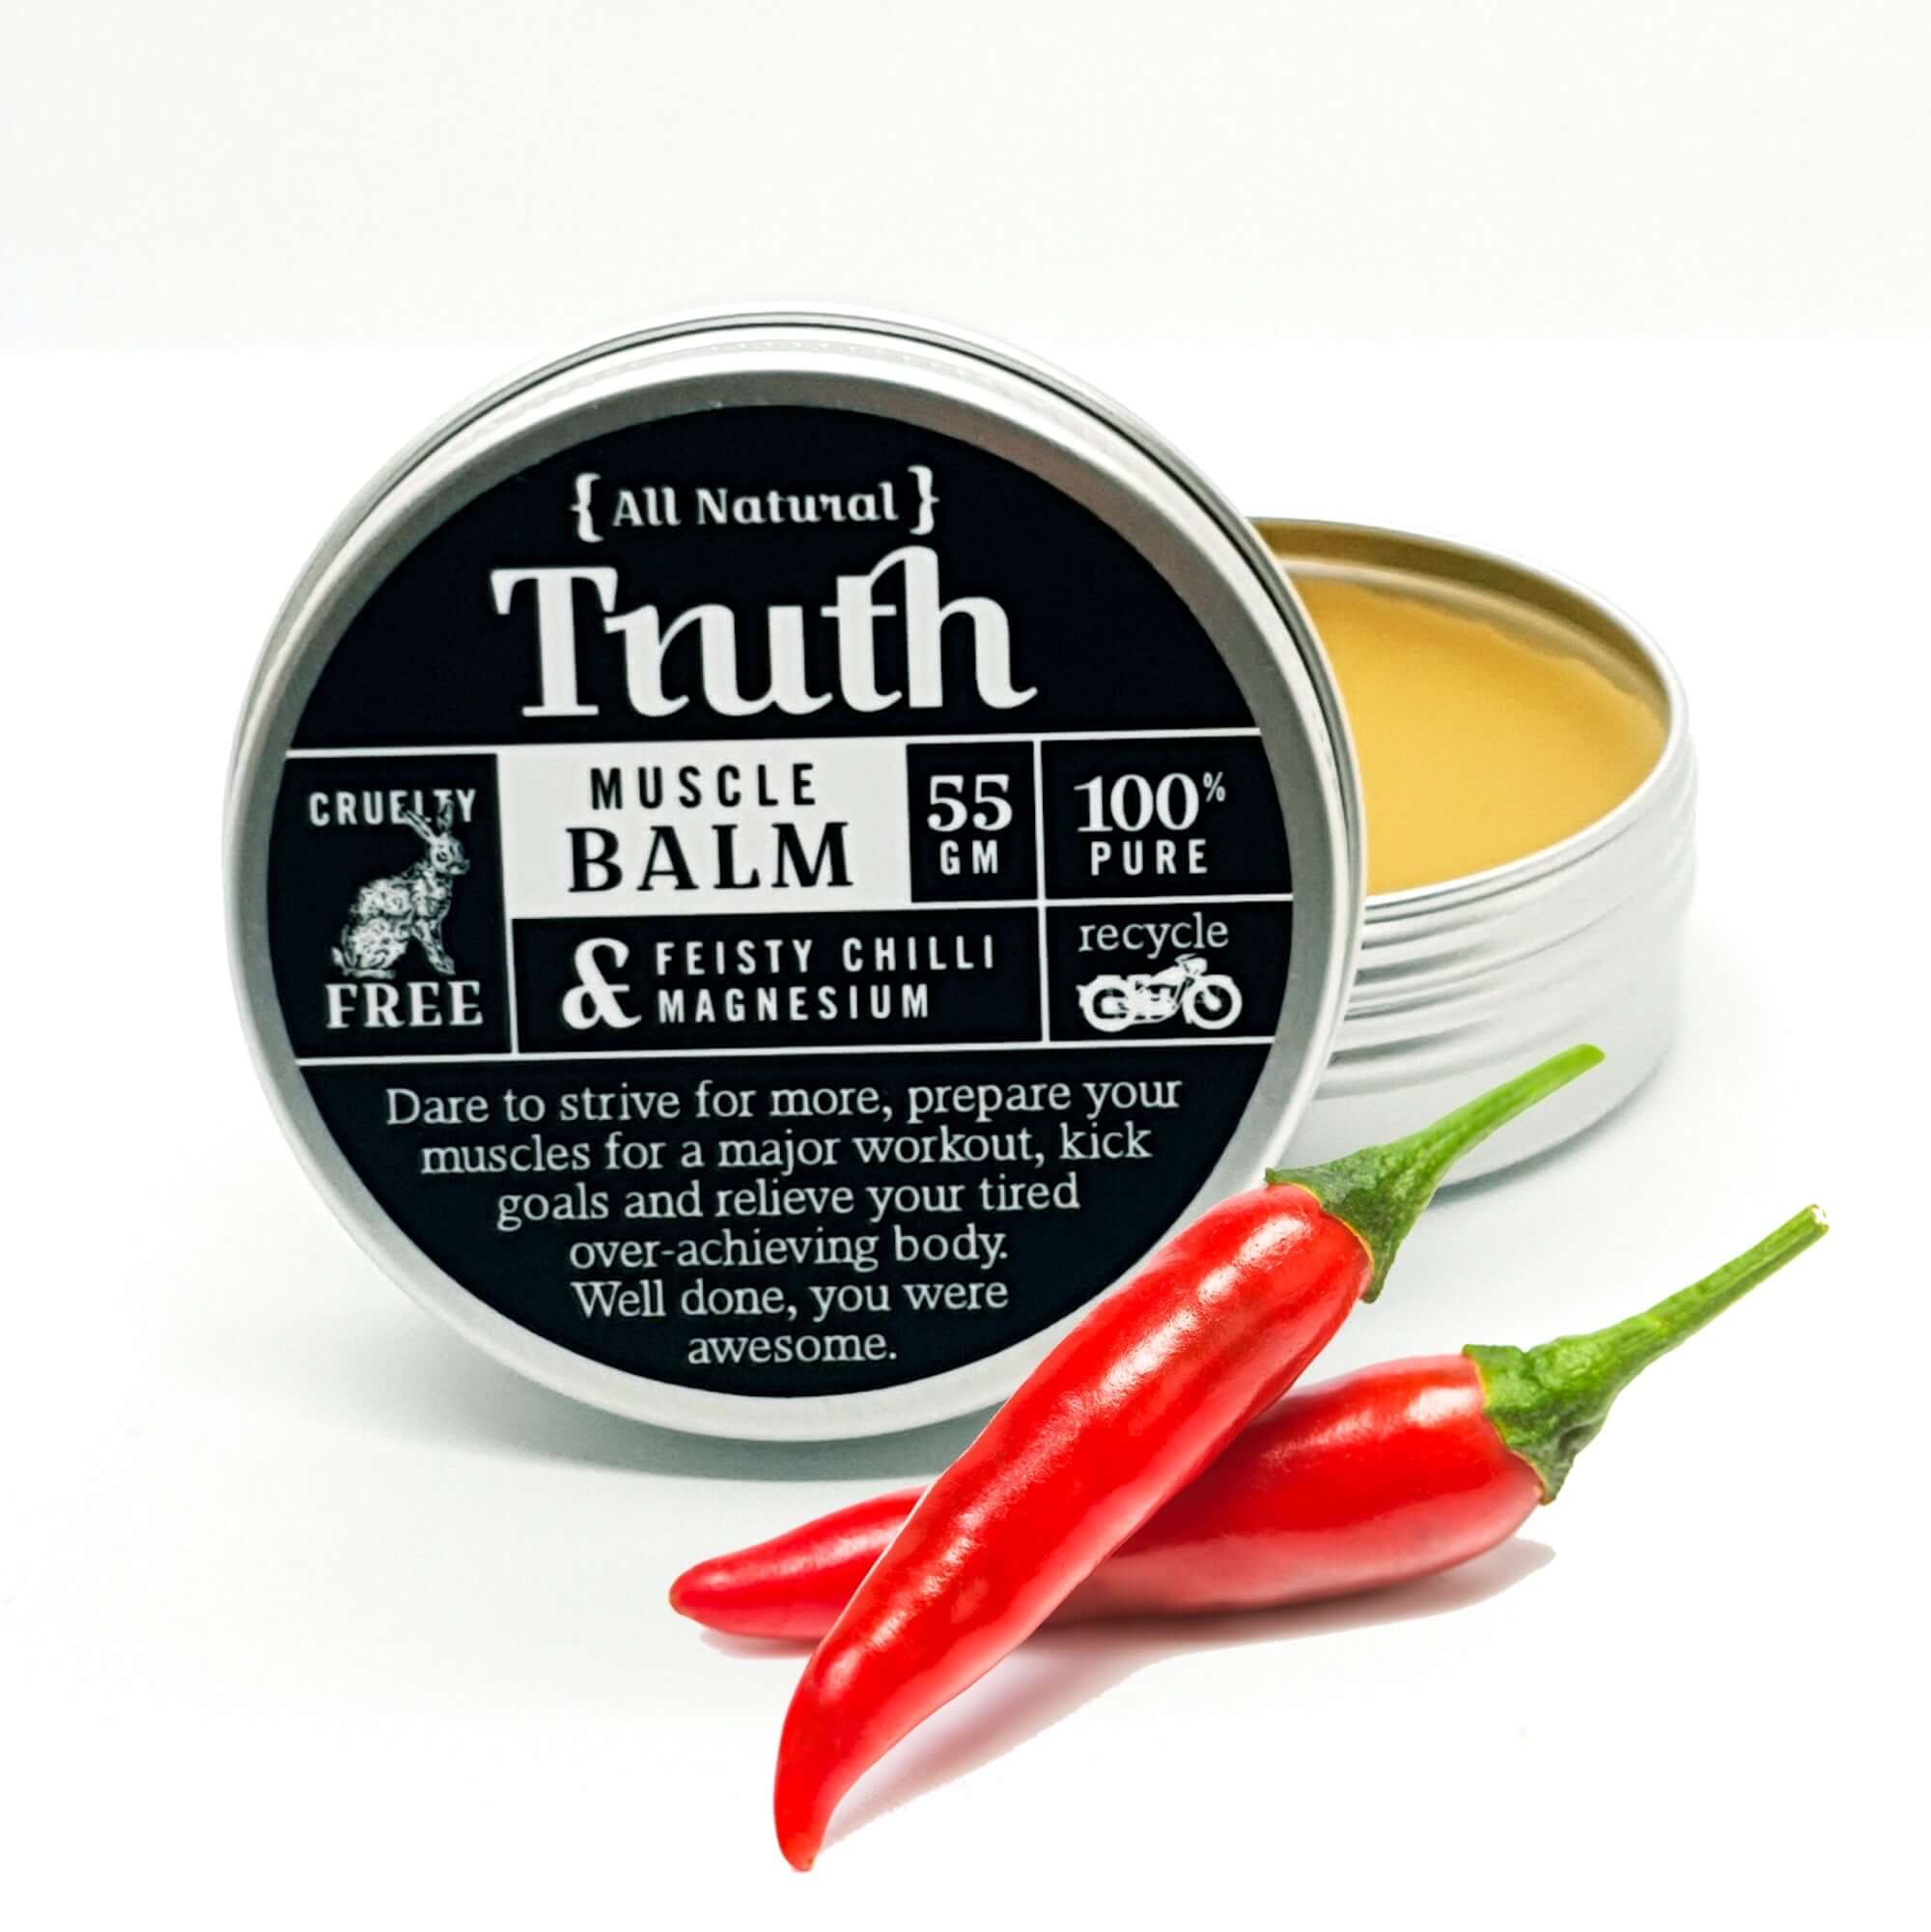 Muscle Balm | Feisty Chilli & Magnesium | 55gm